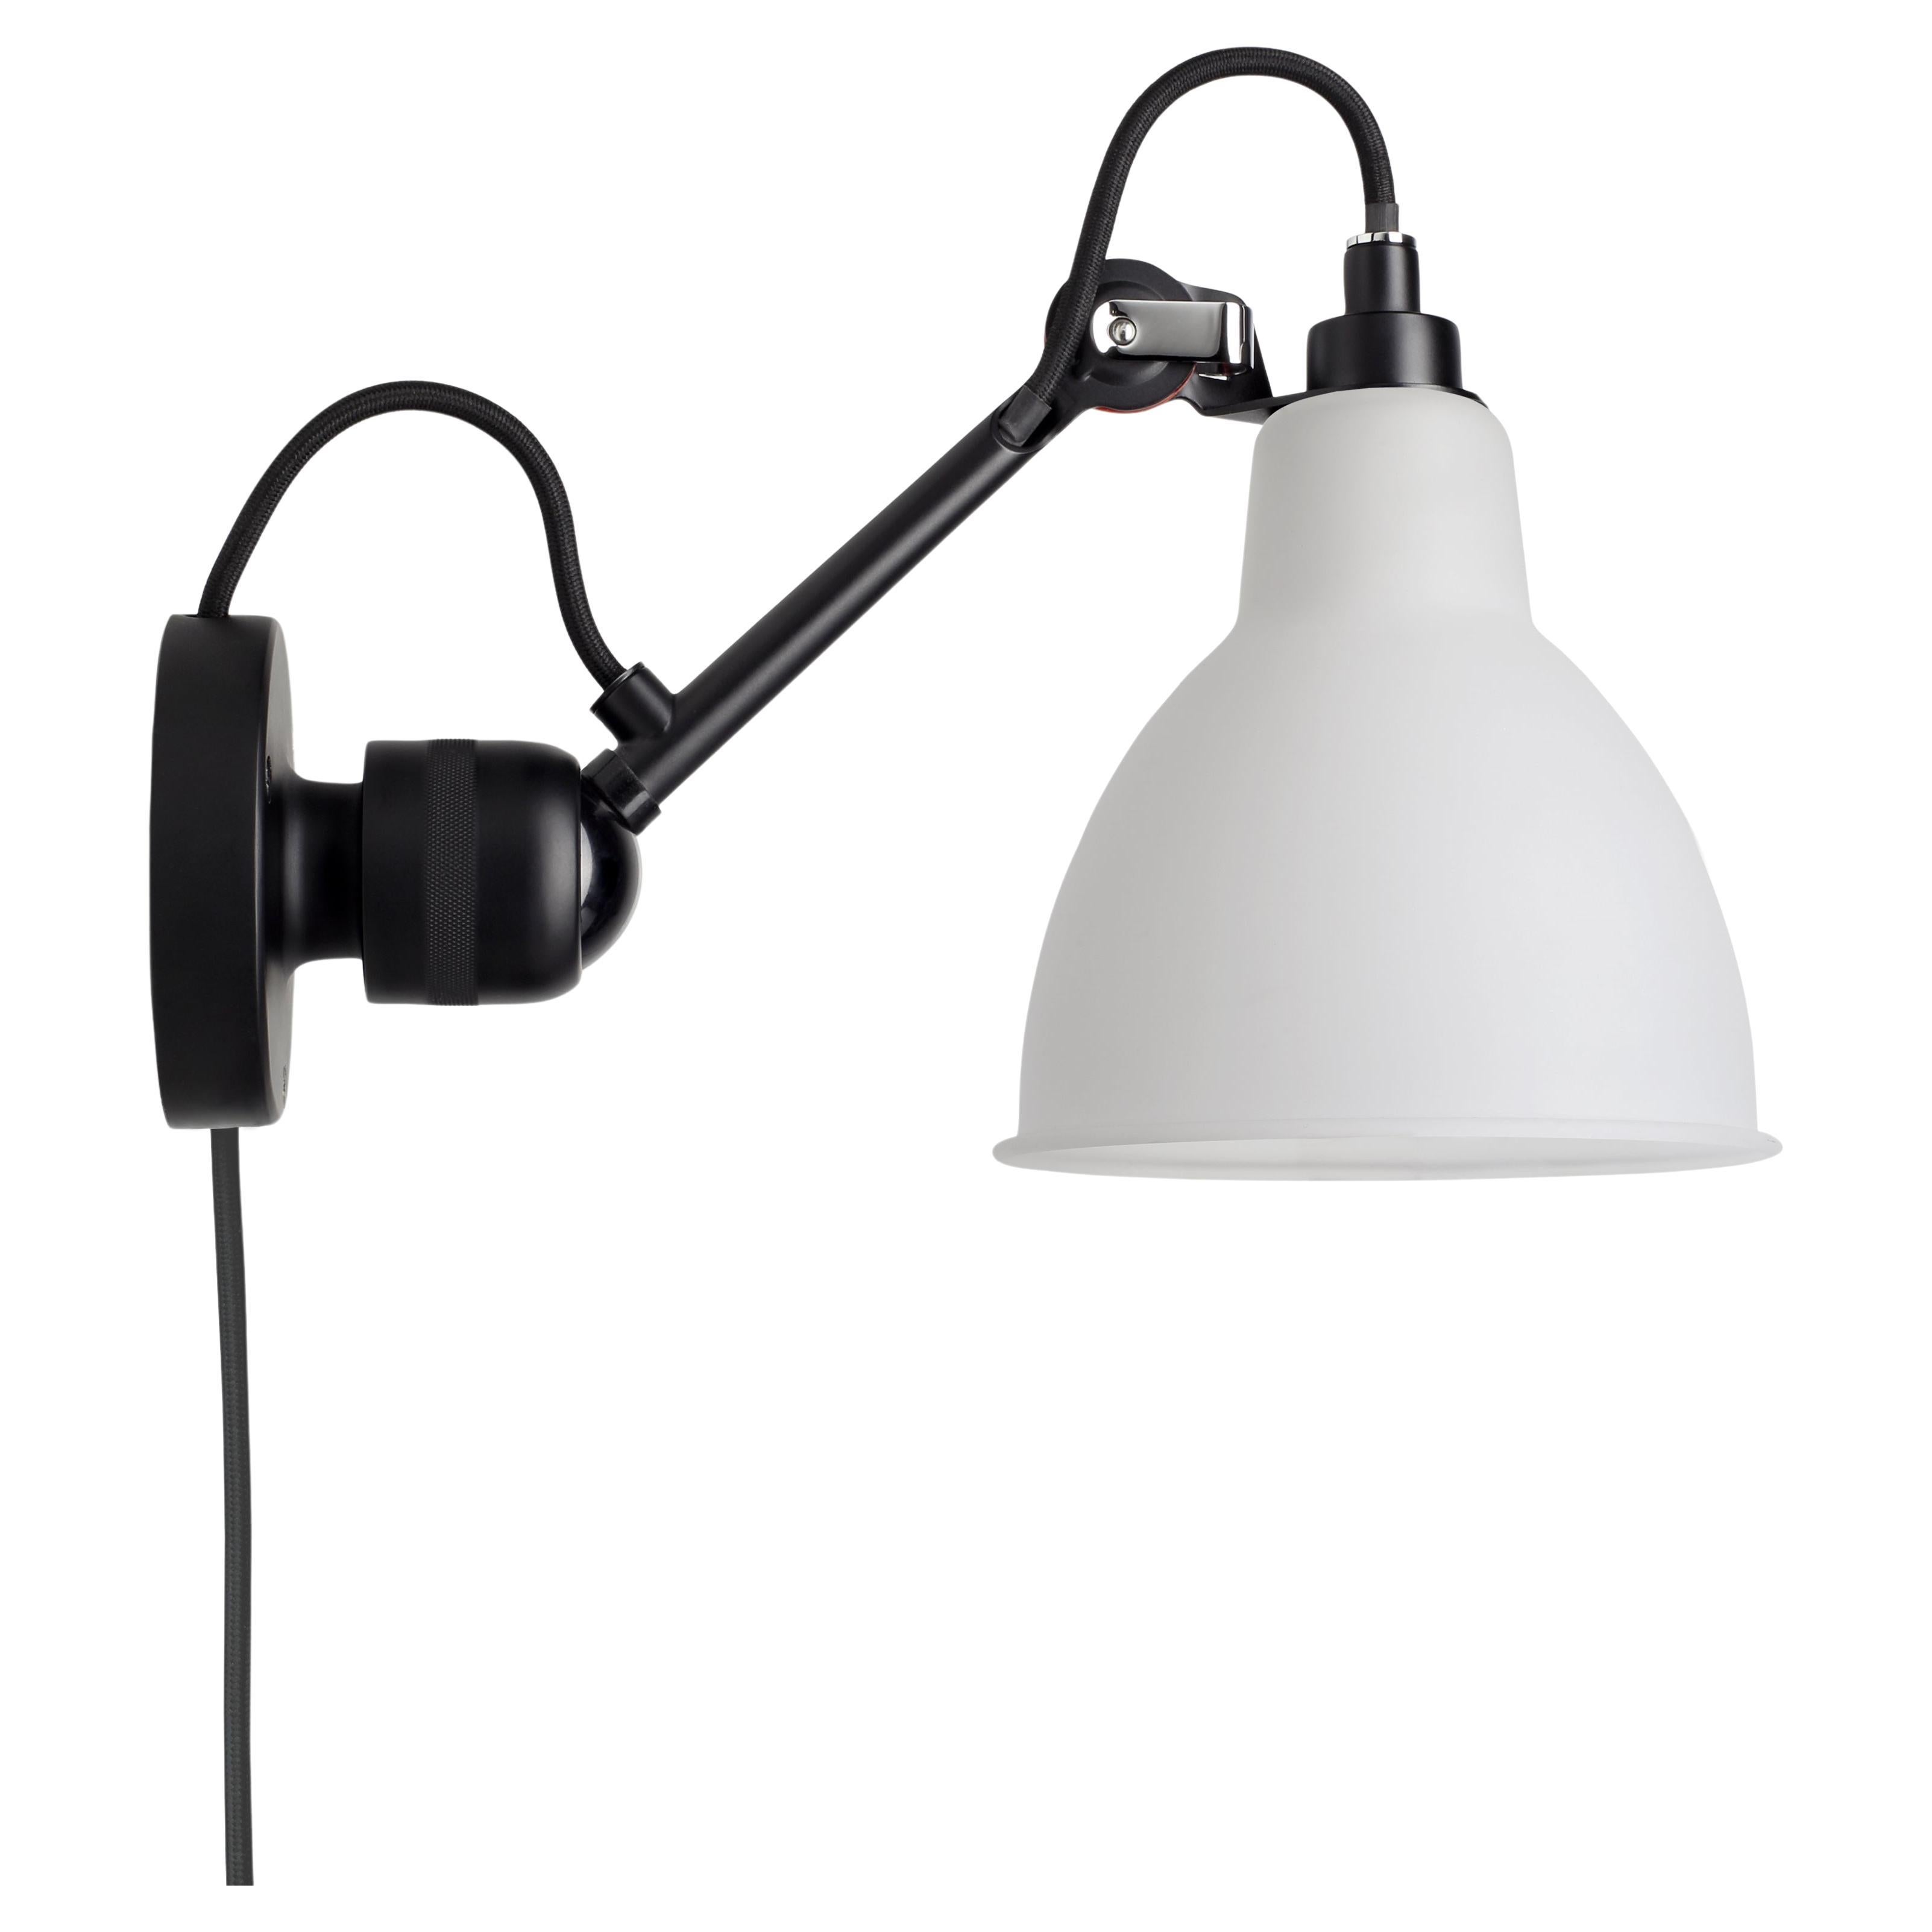 DCW Editions La Lampe Gras N°304 CA Wall Lamp in Black Arm & Frosted Glass Shade For Sale